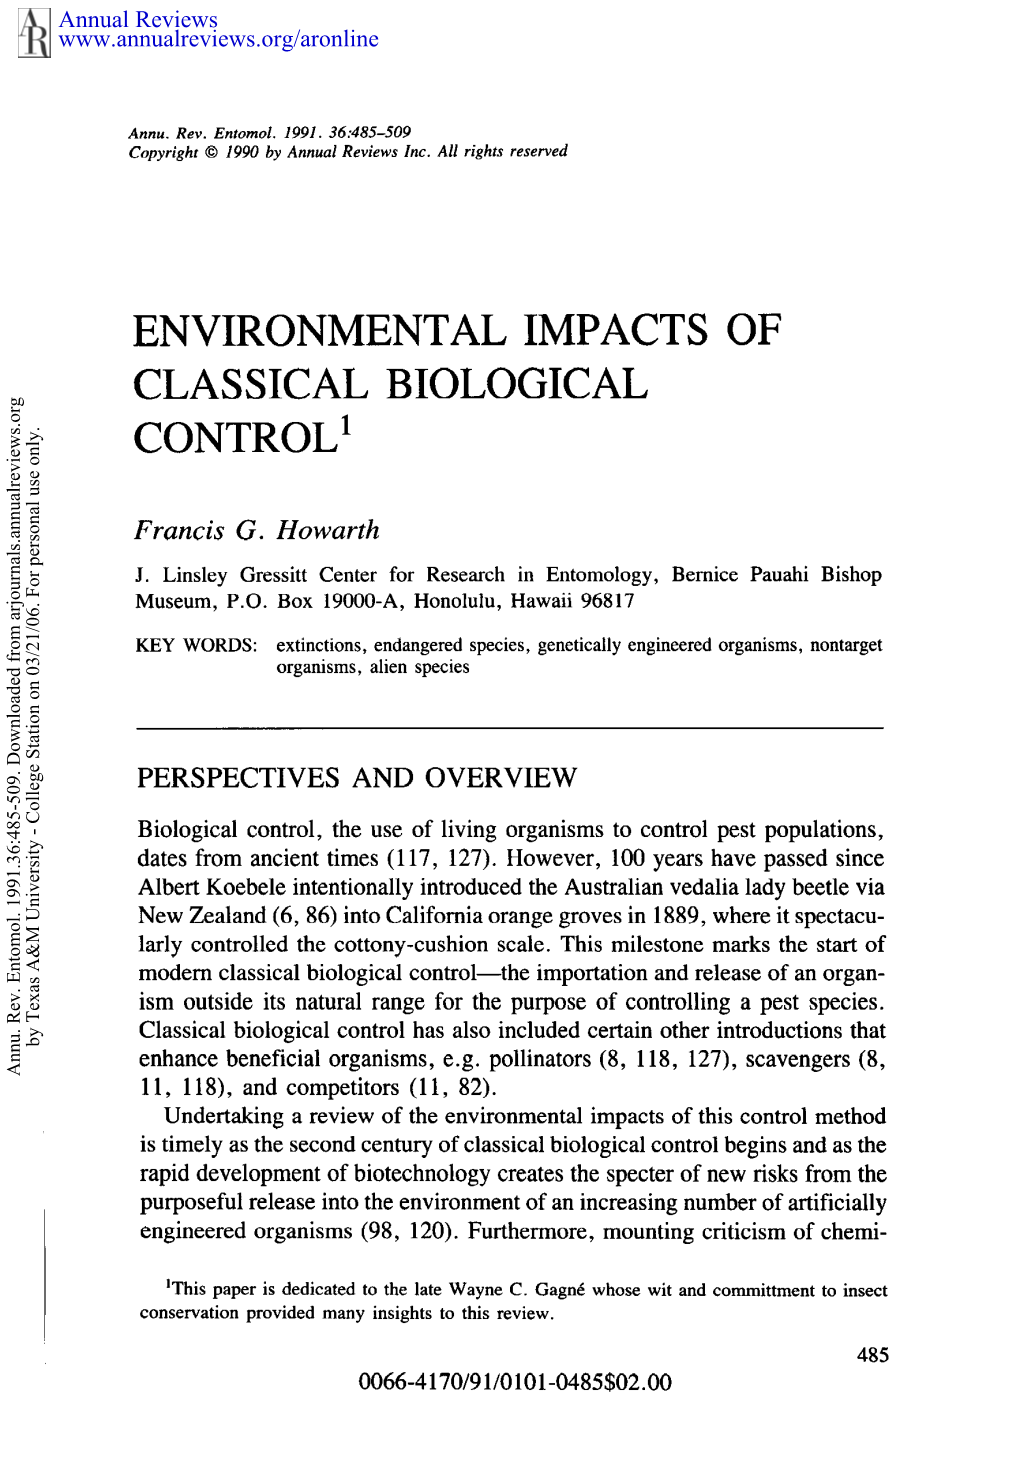 Environmental Impacts of Classical Biological Control